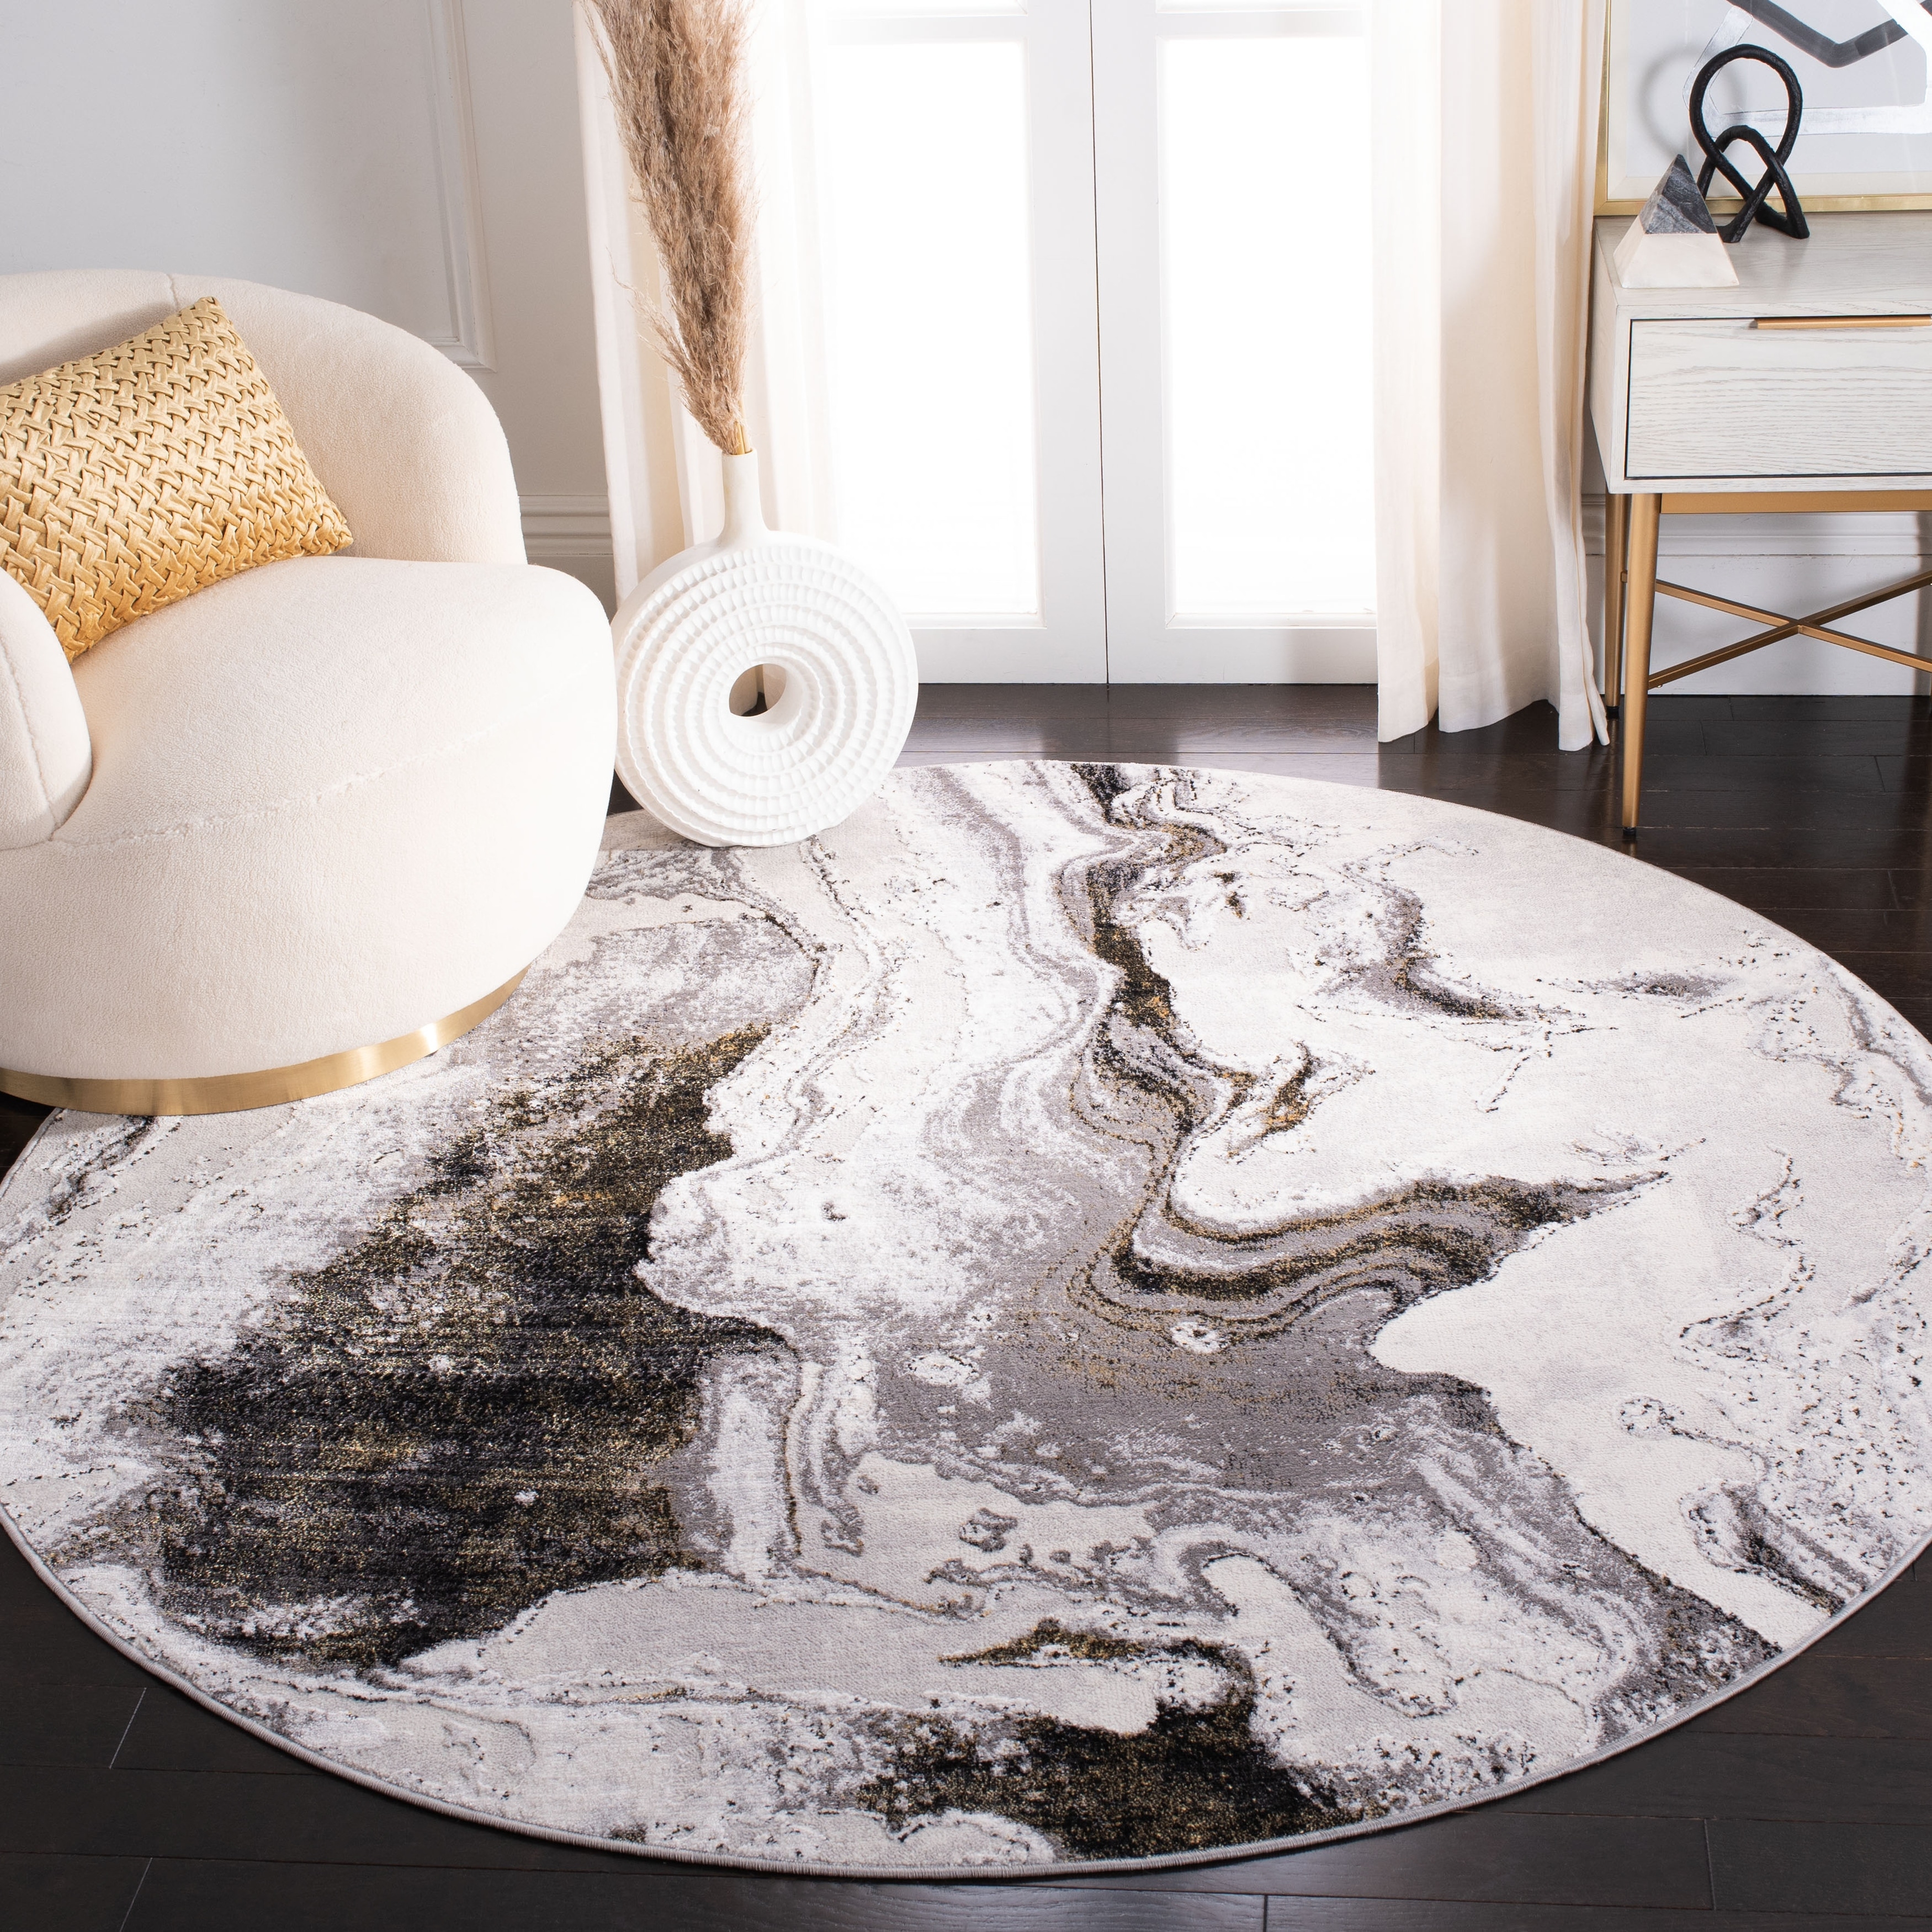 https://ak1.ostkcdn.com/images/products/is/images/direct/e7dcdcb2ae8a7467044de05767580364e645eb6c/SAFAVIEH-Amelia-Concezia-Modern-Abstract-Rug.jpg